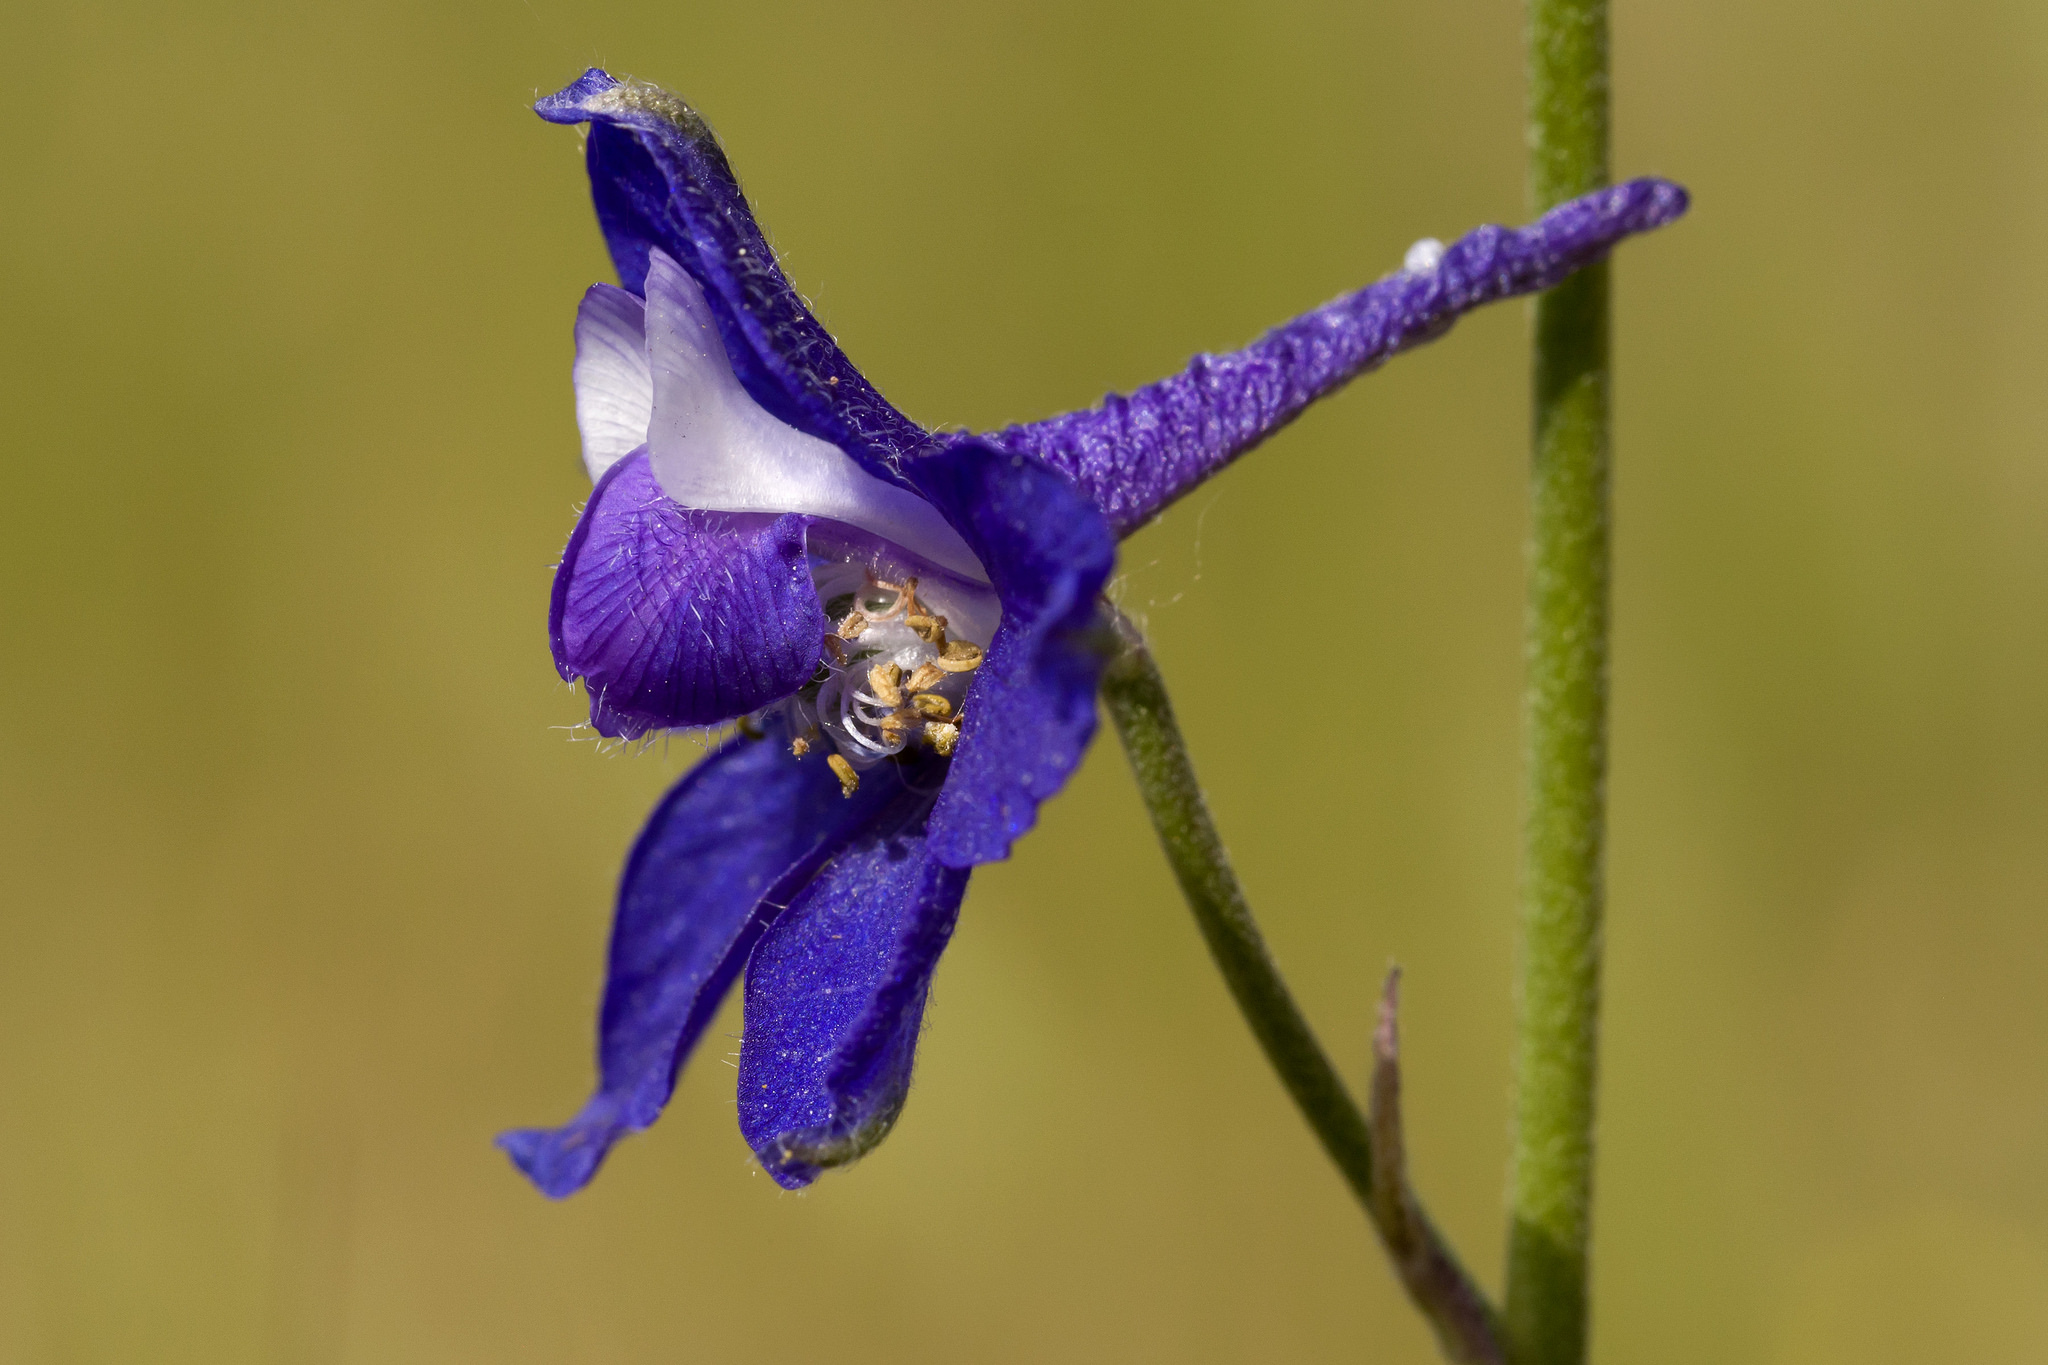 Delphinium hansenii showing white and violet petals and sepals and characteristic spur